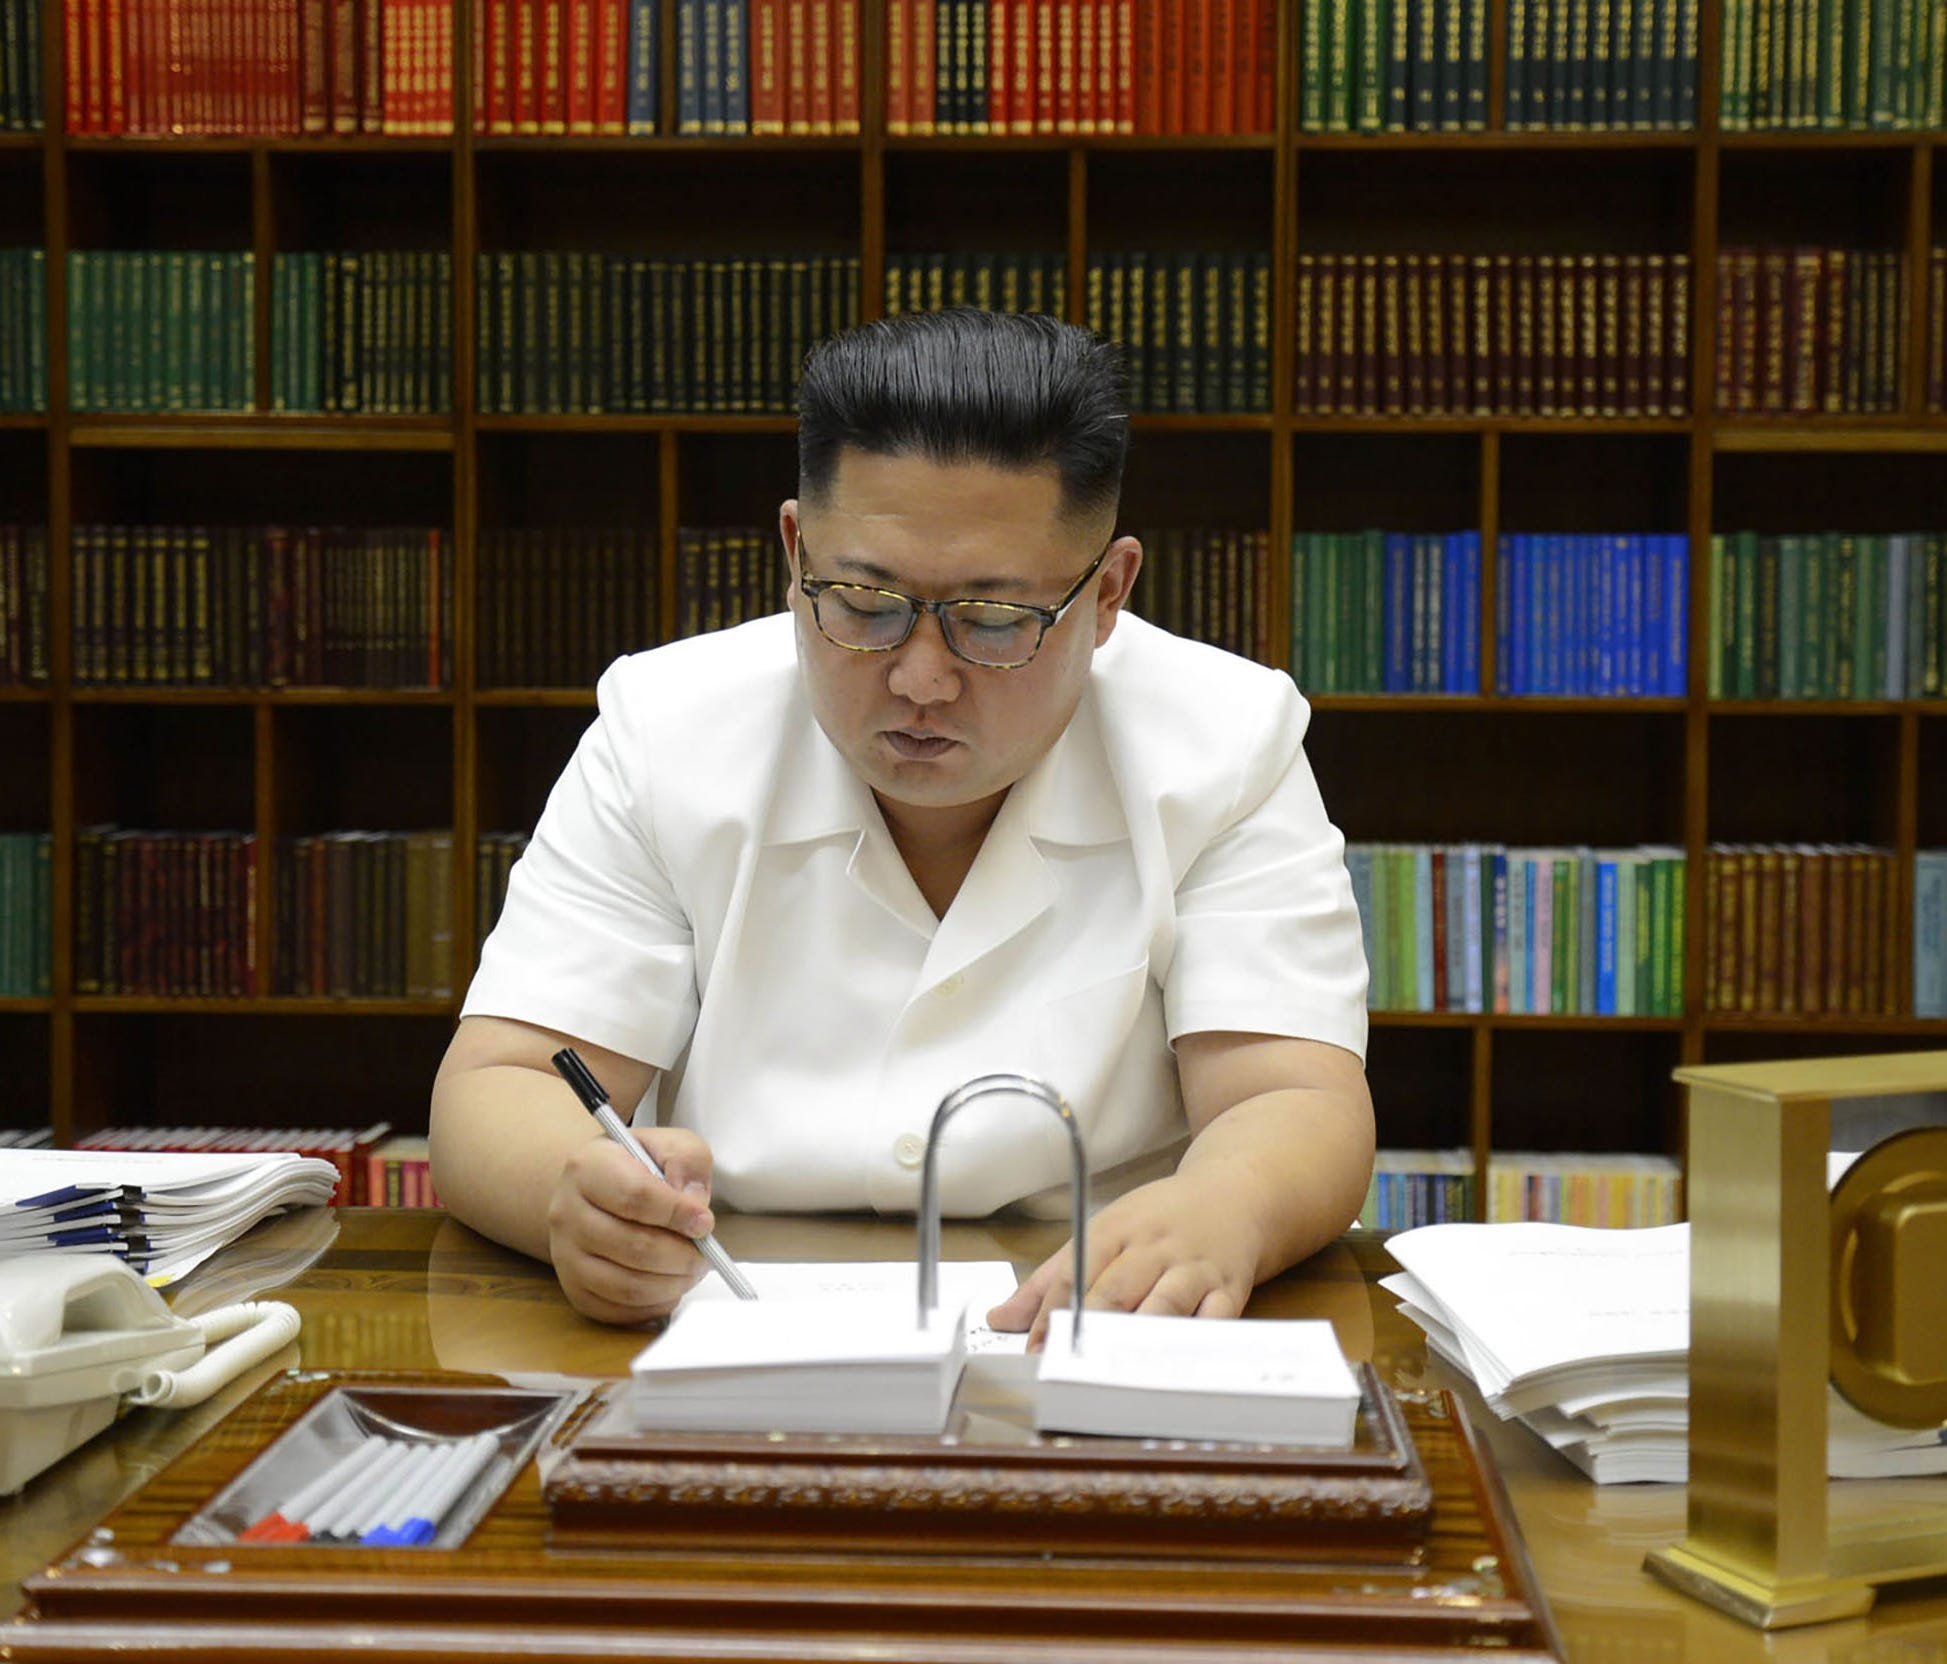 This July 27, 2017, photo released by North Korea's official Korean Central News Agency shows North Korean leader Kim Jong Un signing documents for the test launch of an intercontinental ballistic missile at an undisclosed place in his country.